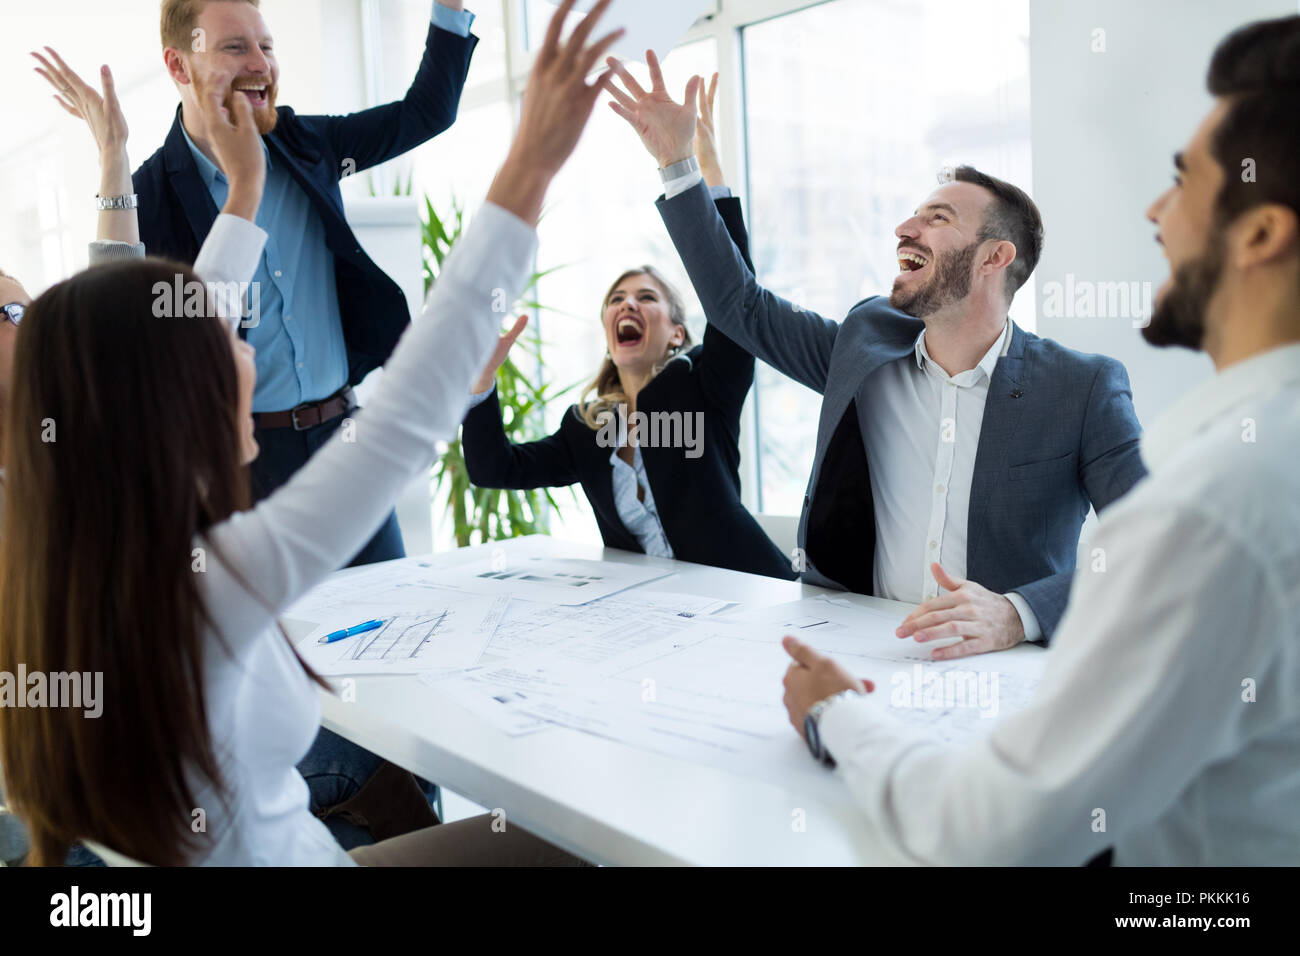 Business people working together on project and brainstorming in office Stock Photo